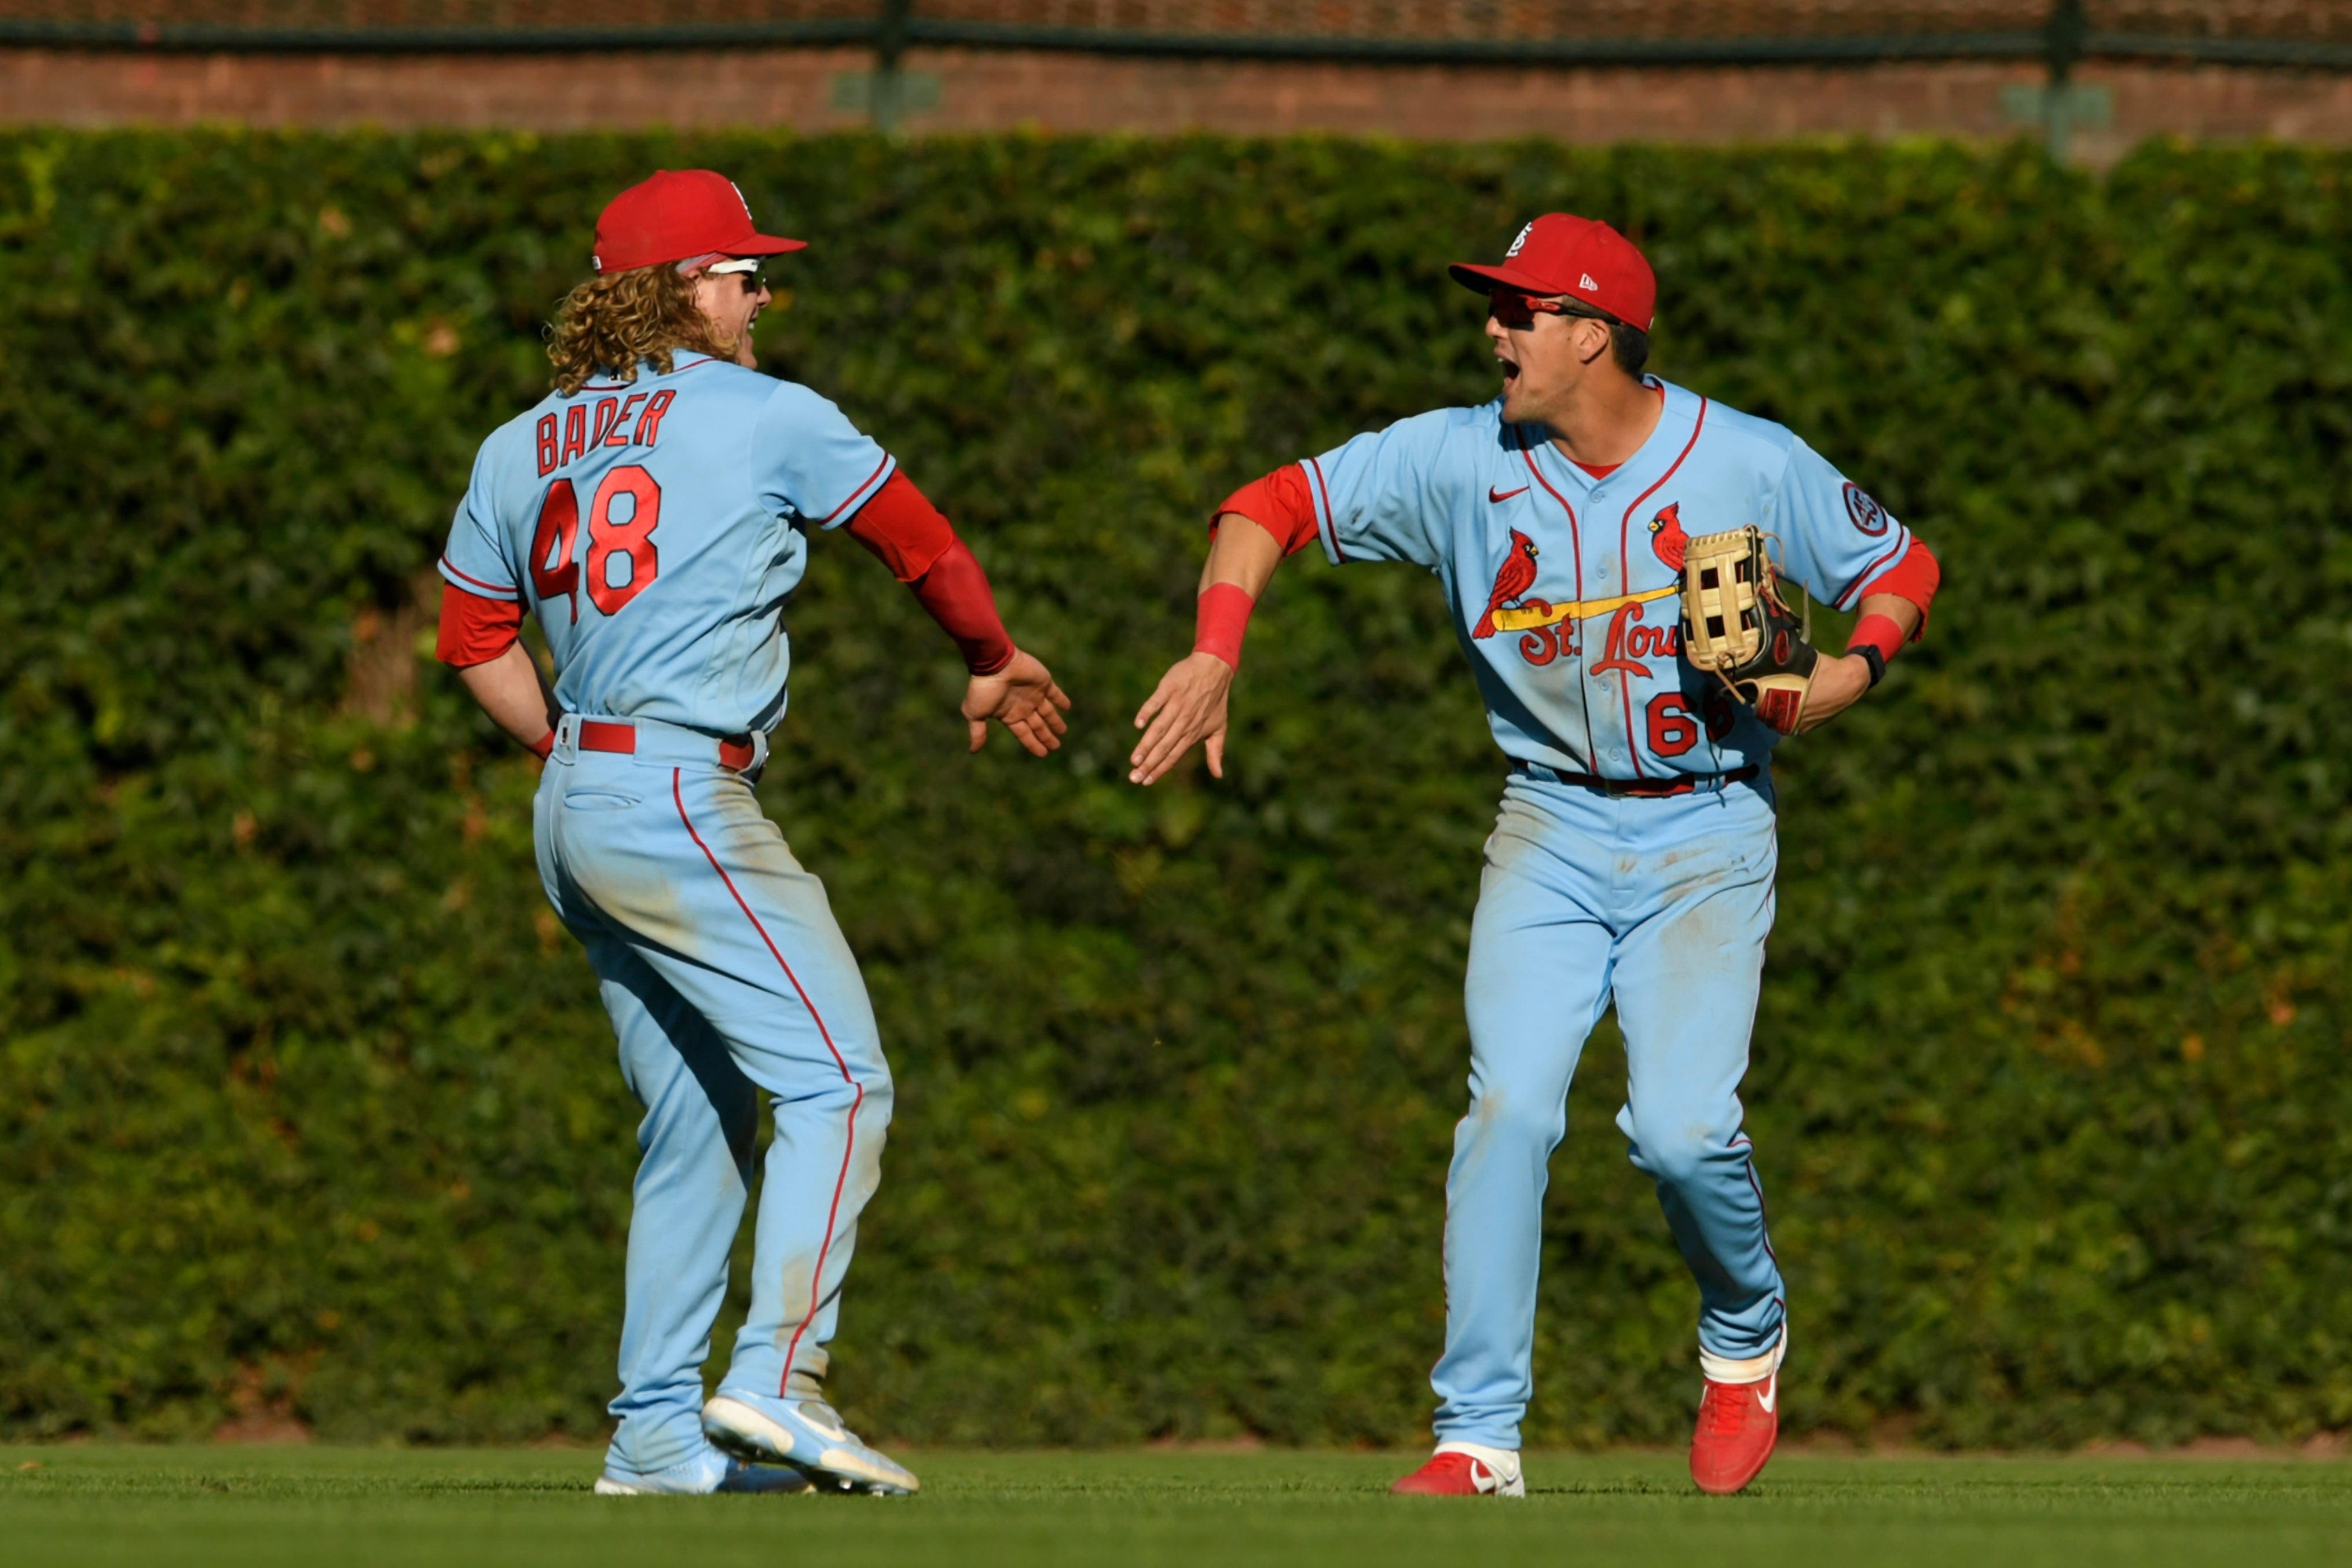 CARDENALES IMPARABLES